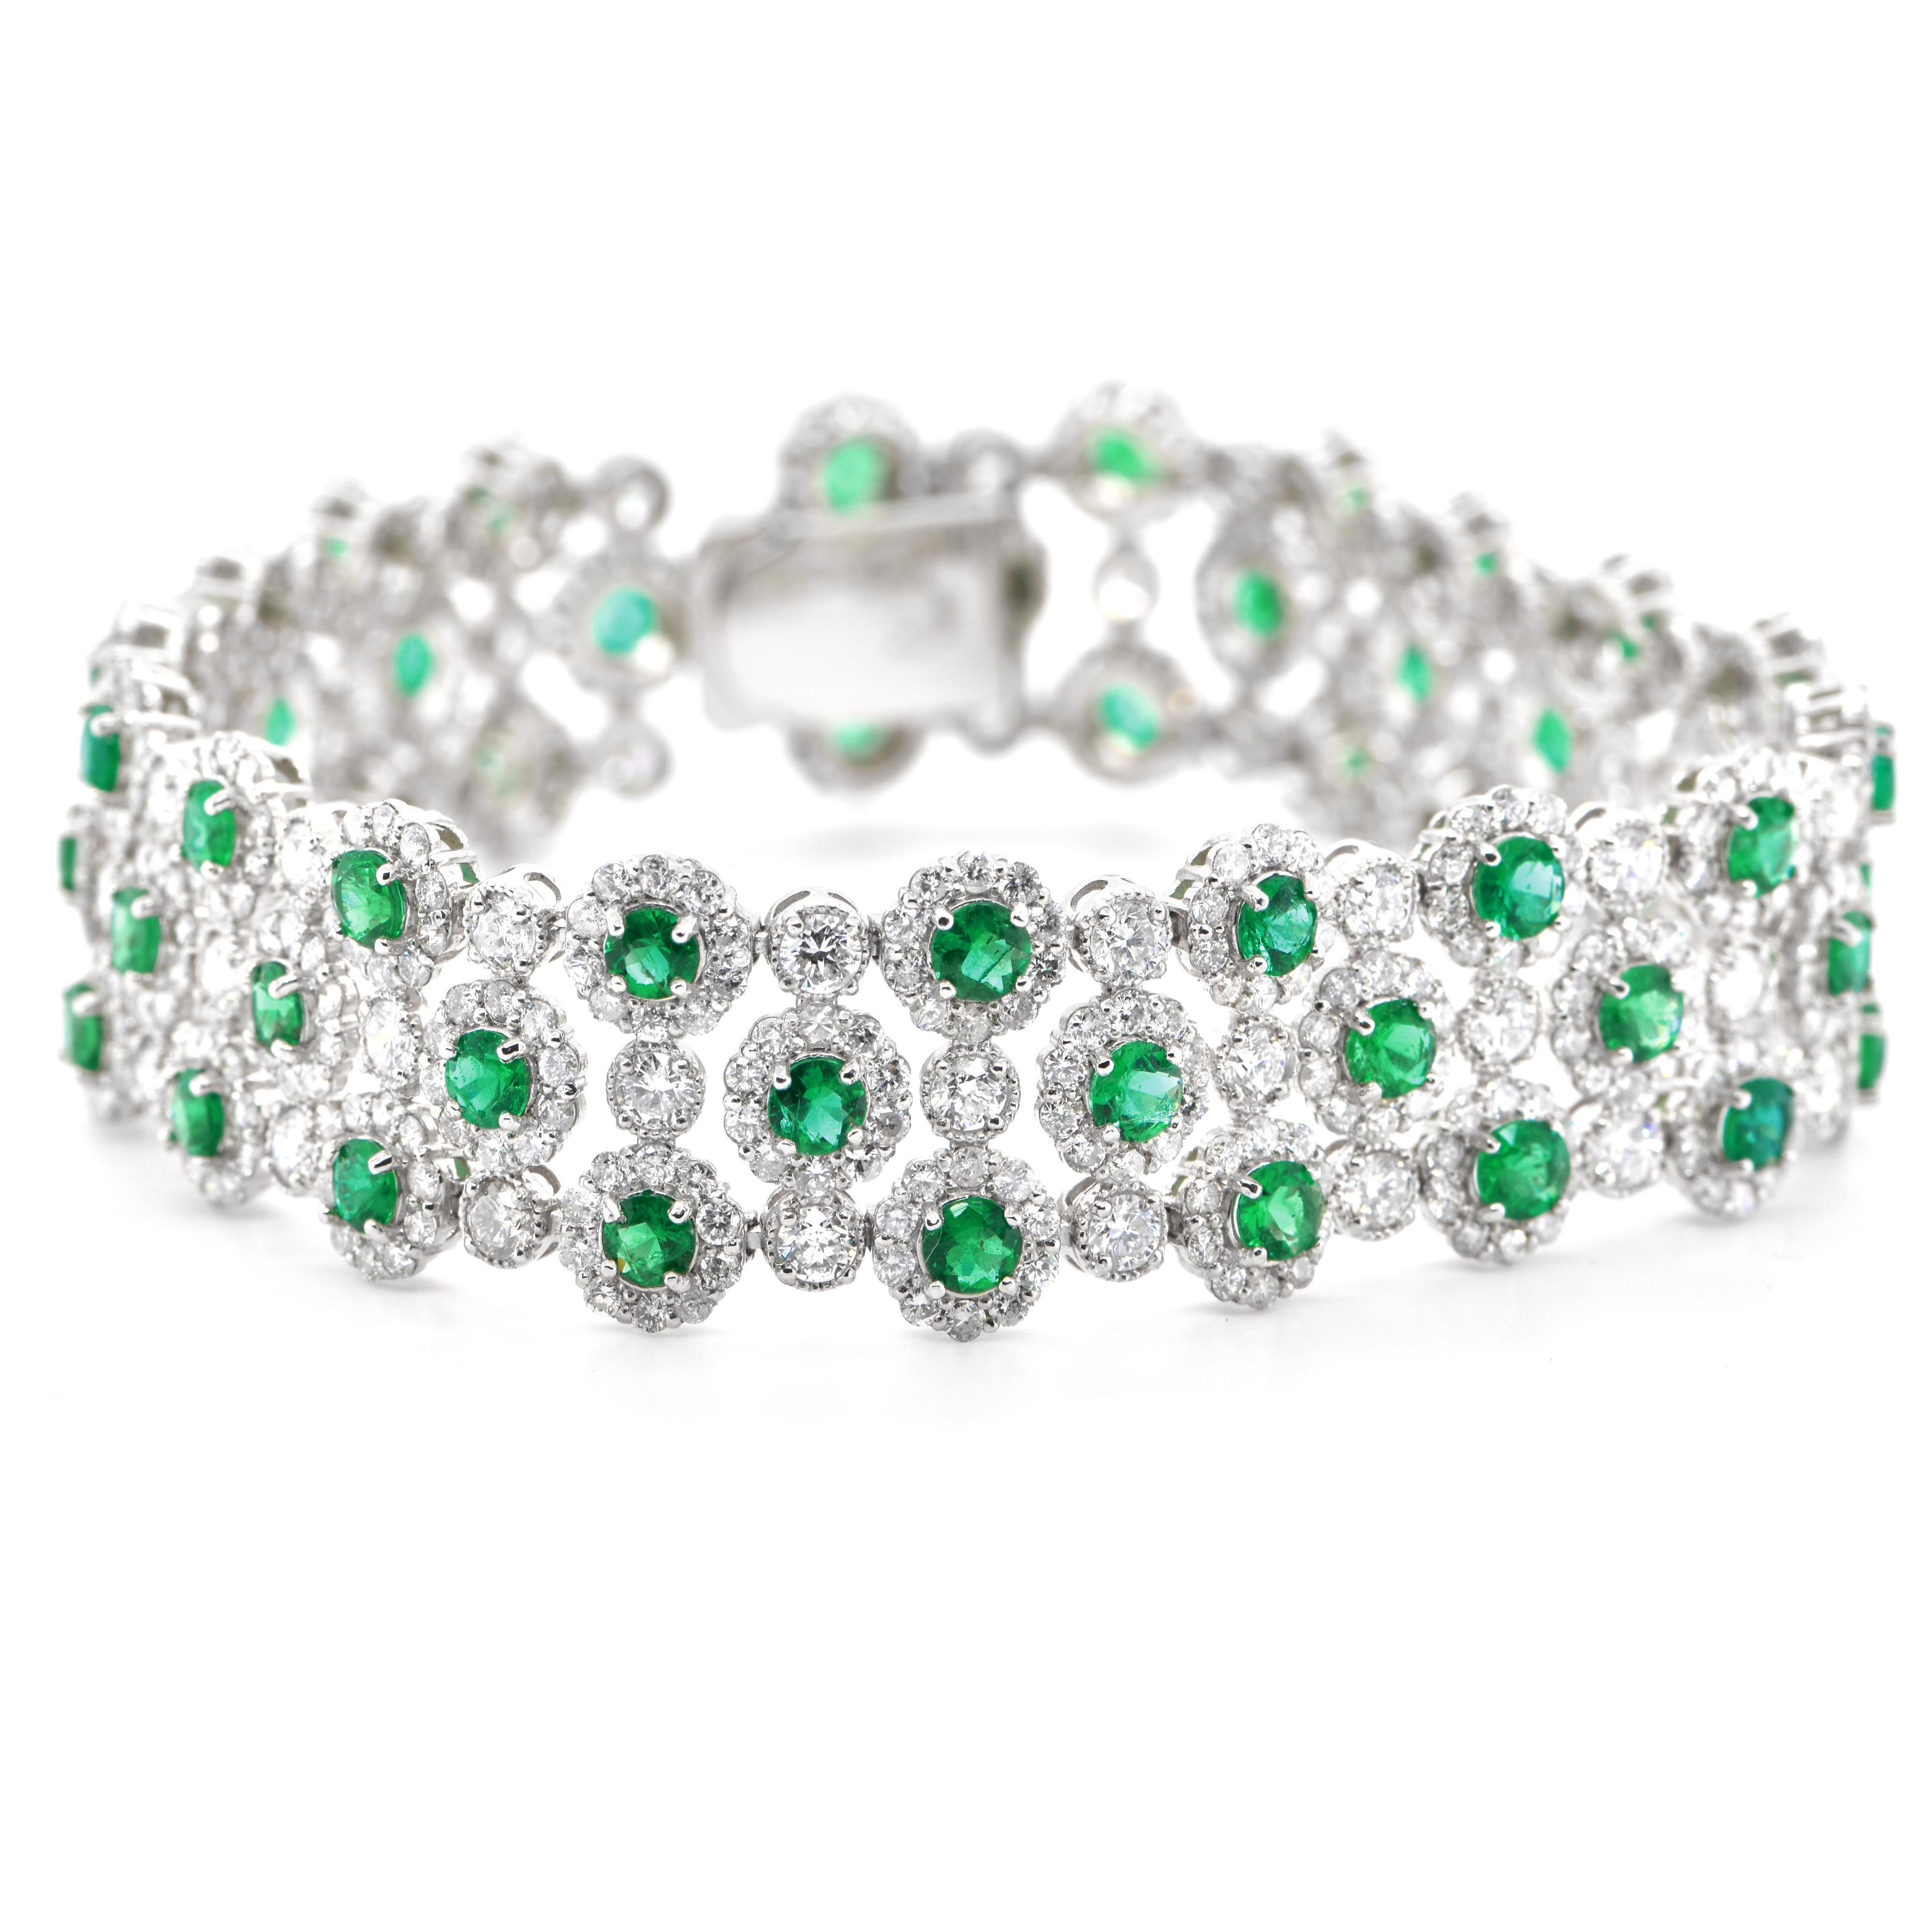 A beautiful 3 Line Bracelet featuring a total of 5.19 Carats of Natural Emeralds and 8.74 Carats of Diamond Accents set in Platinum. The Emerald are of 5x3mm size. People have admired emerald’s green for thousands of years. Emeralds have always been